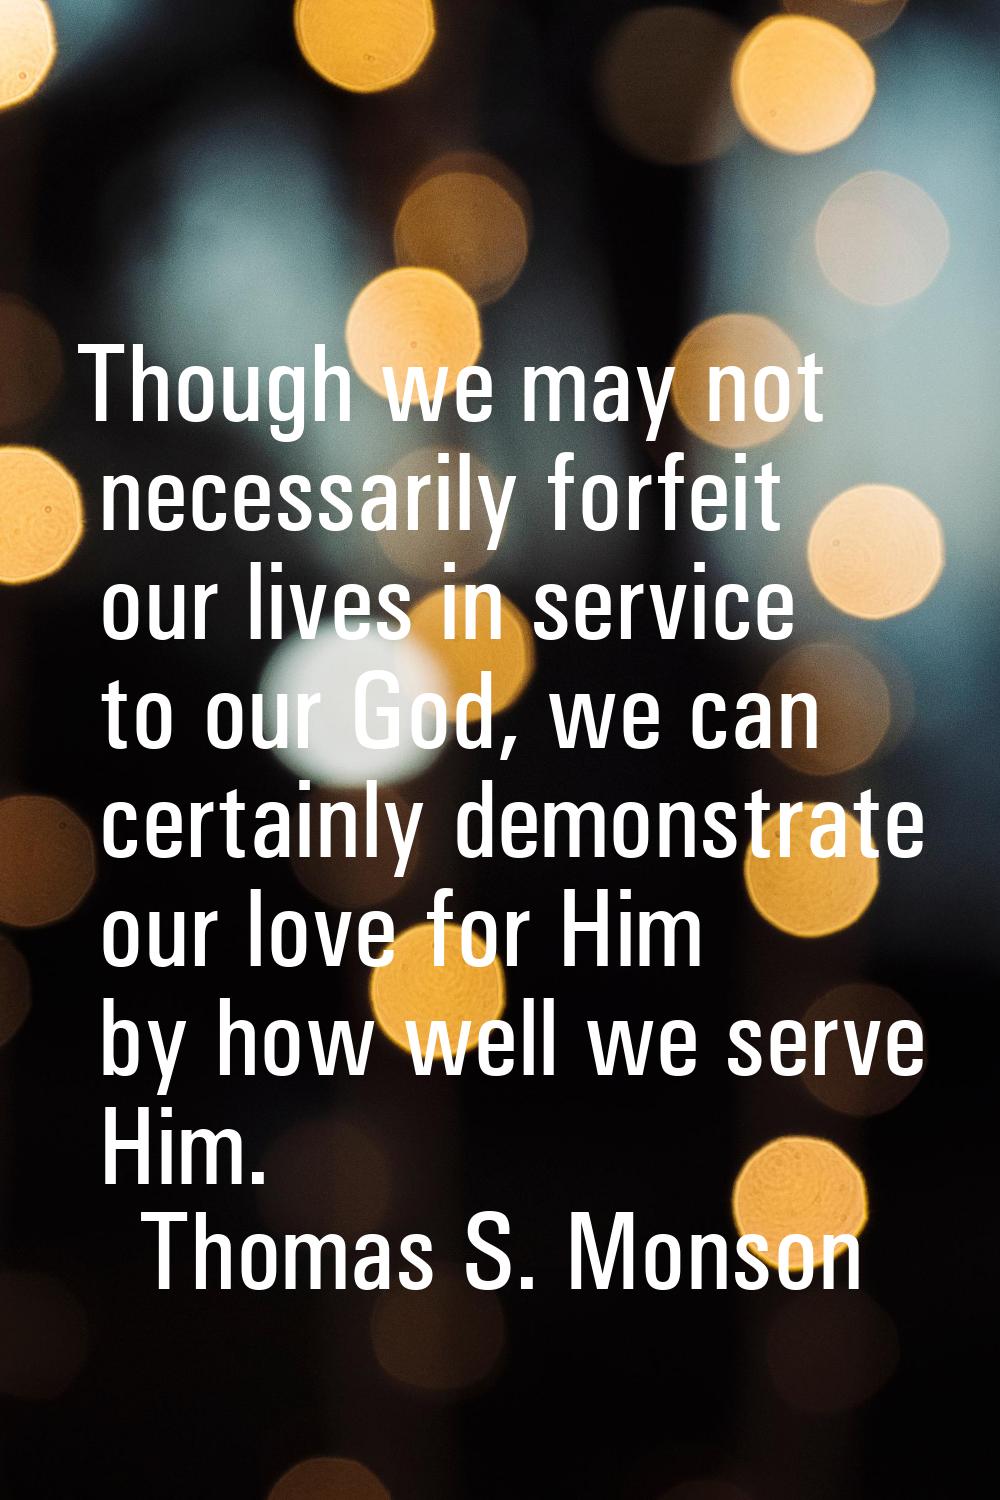 Though we may not necessarily forfeit our lives in service to our God, we can certainly demonstrate